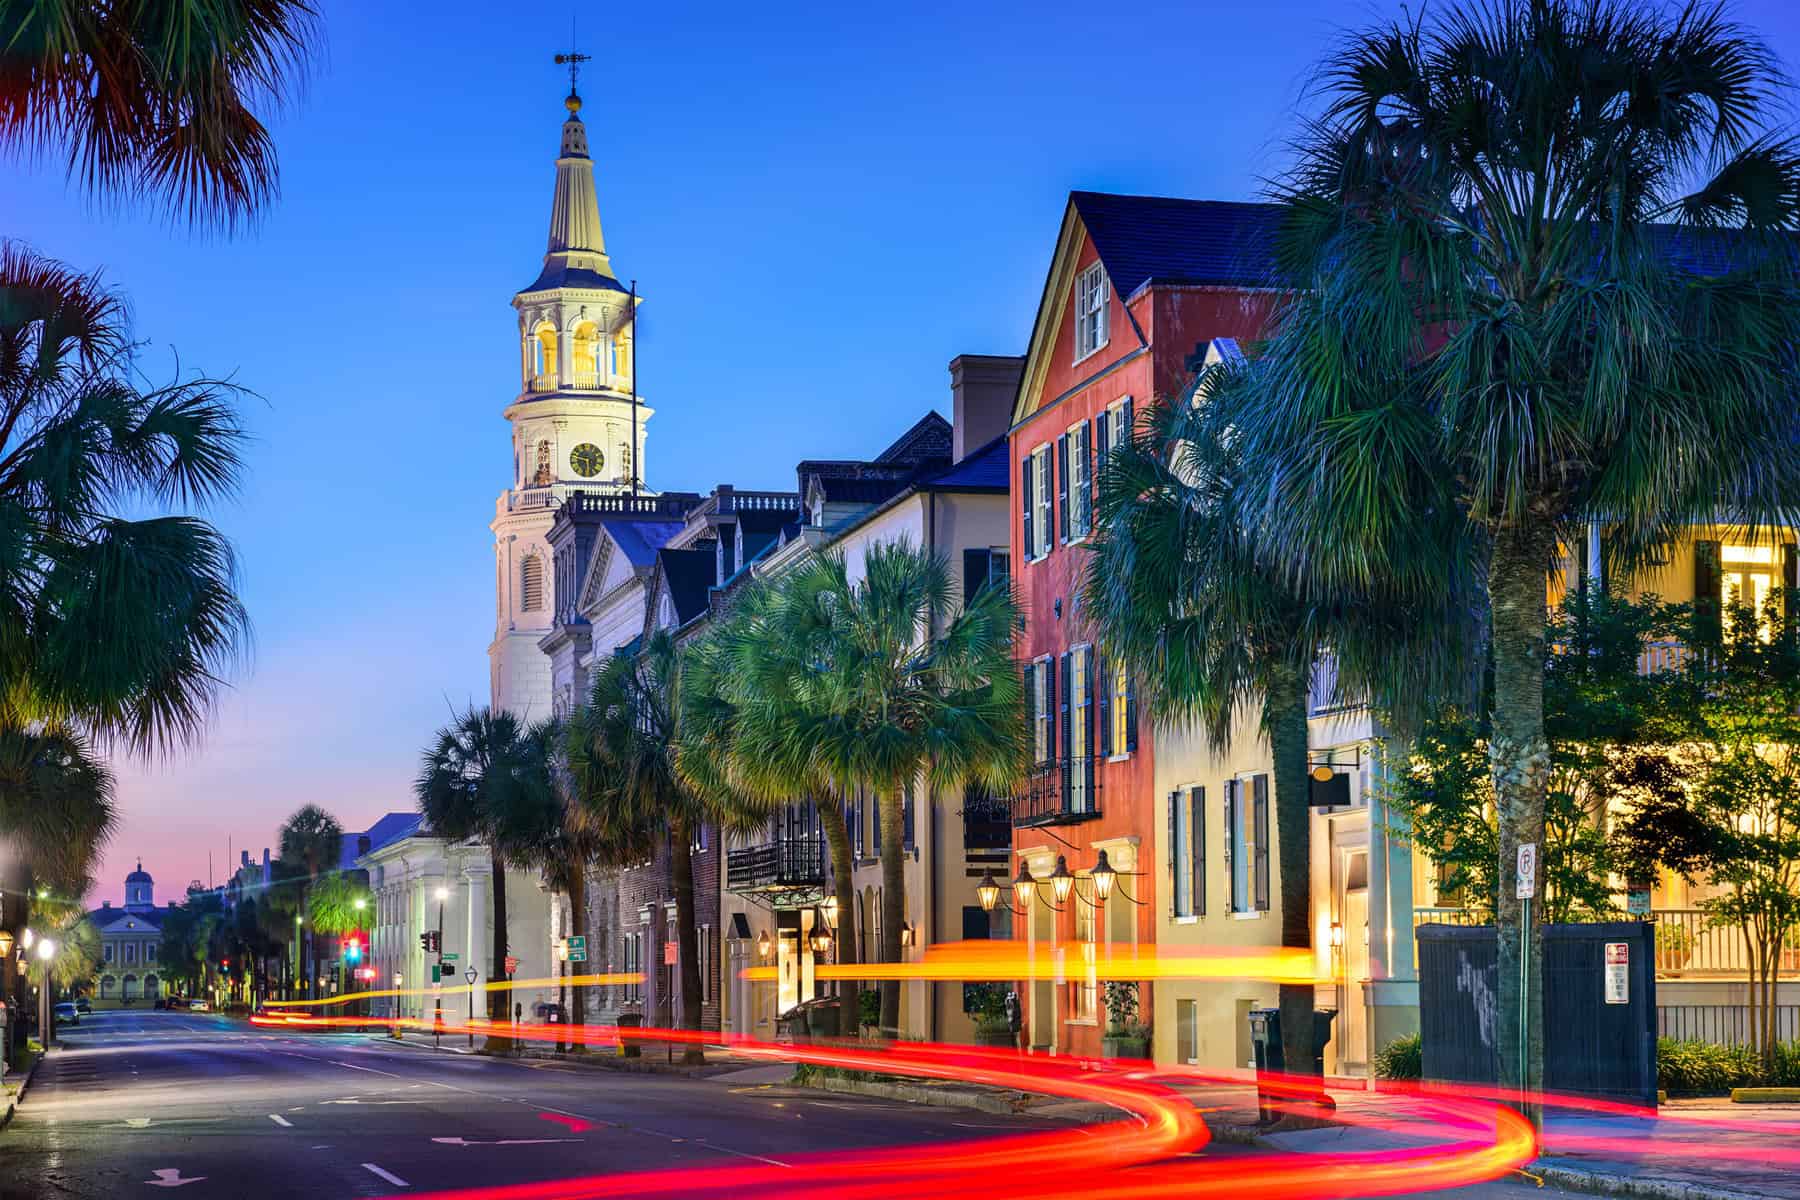 [Press Release] Beyond Times Square Expands Its Luxury Travel Experiences to Savannah and Charleston